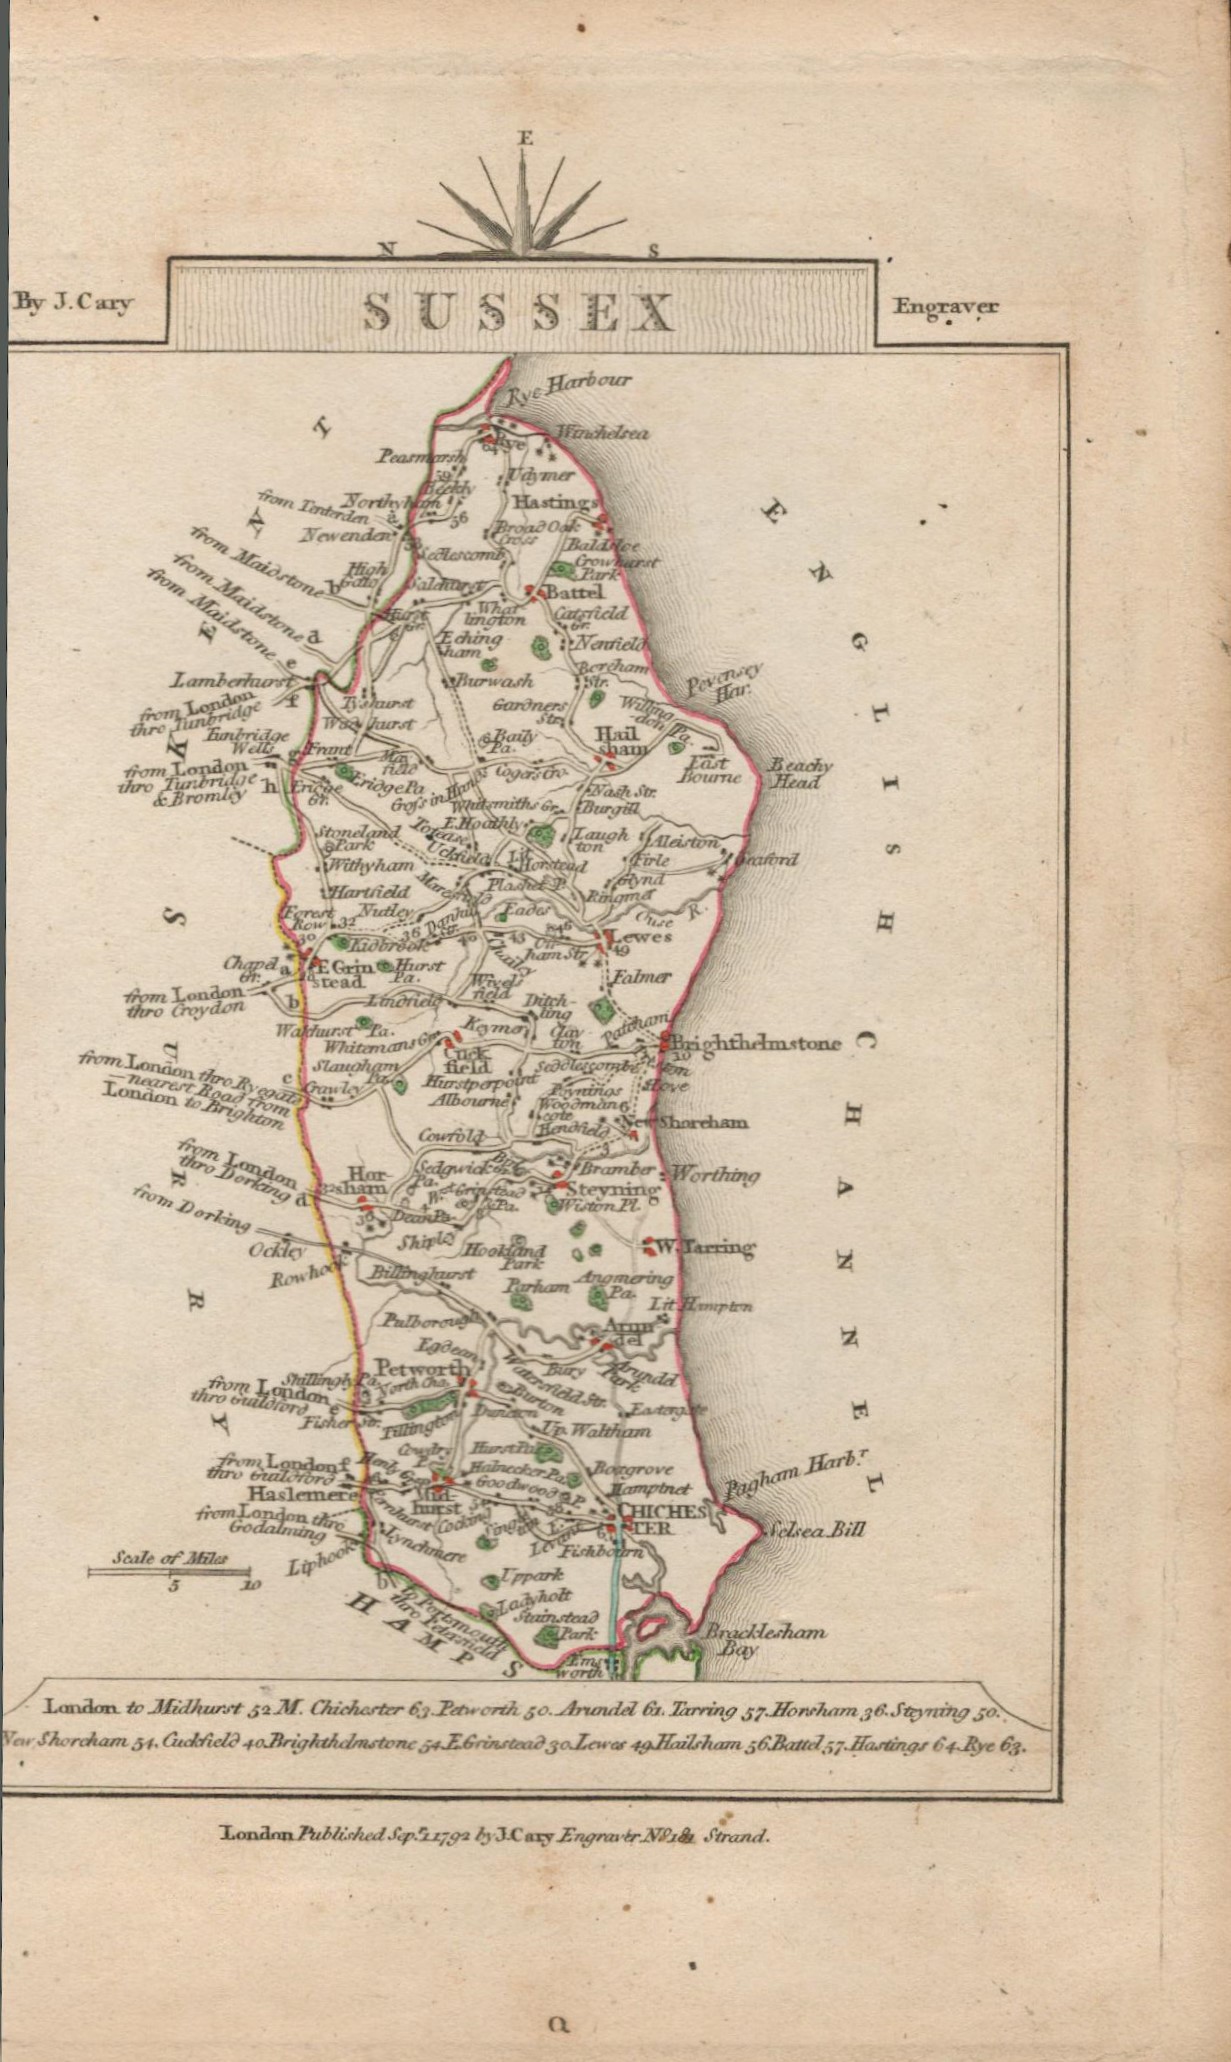 John Cary’s 1791 Antique Copper Engraved Map Sussex & Warwickshire. - Image 2 of 2